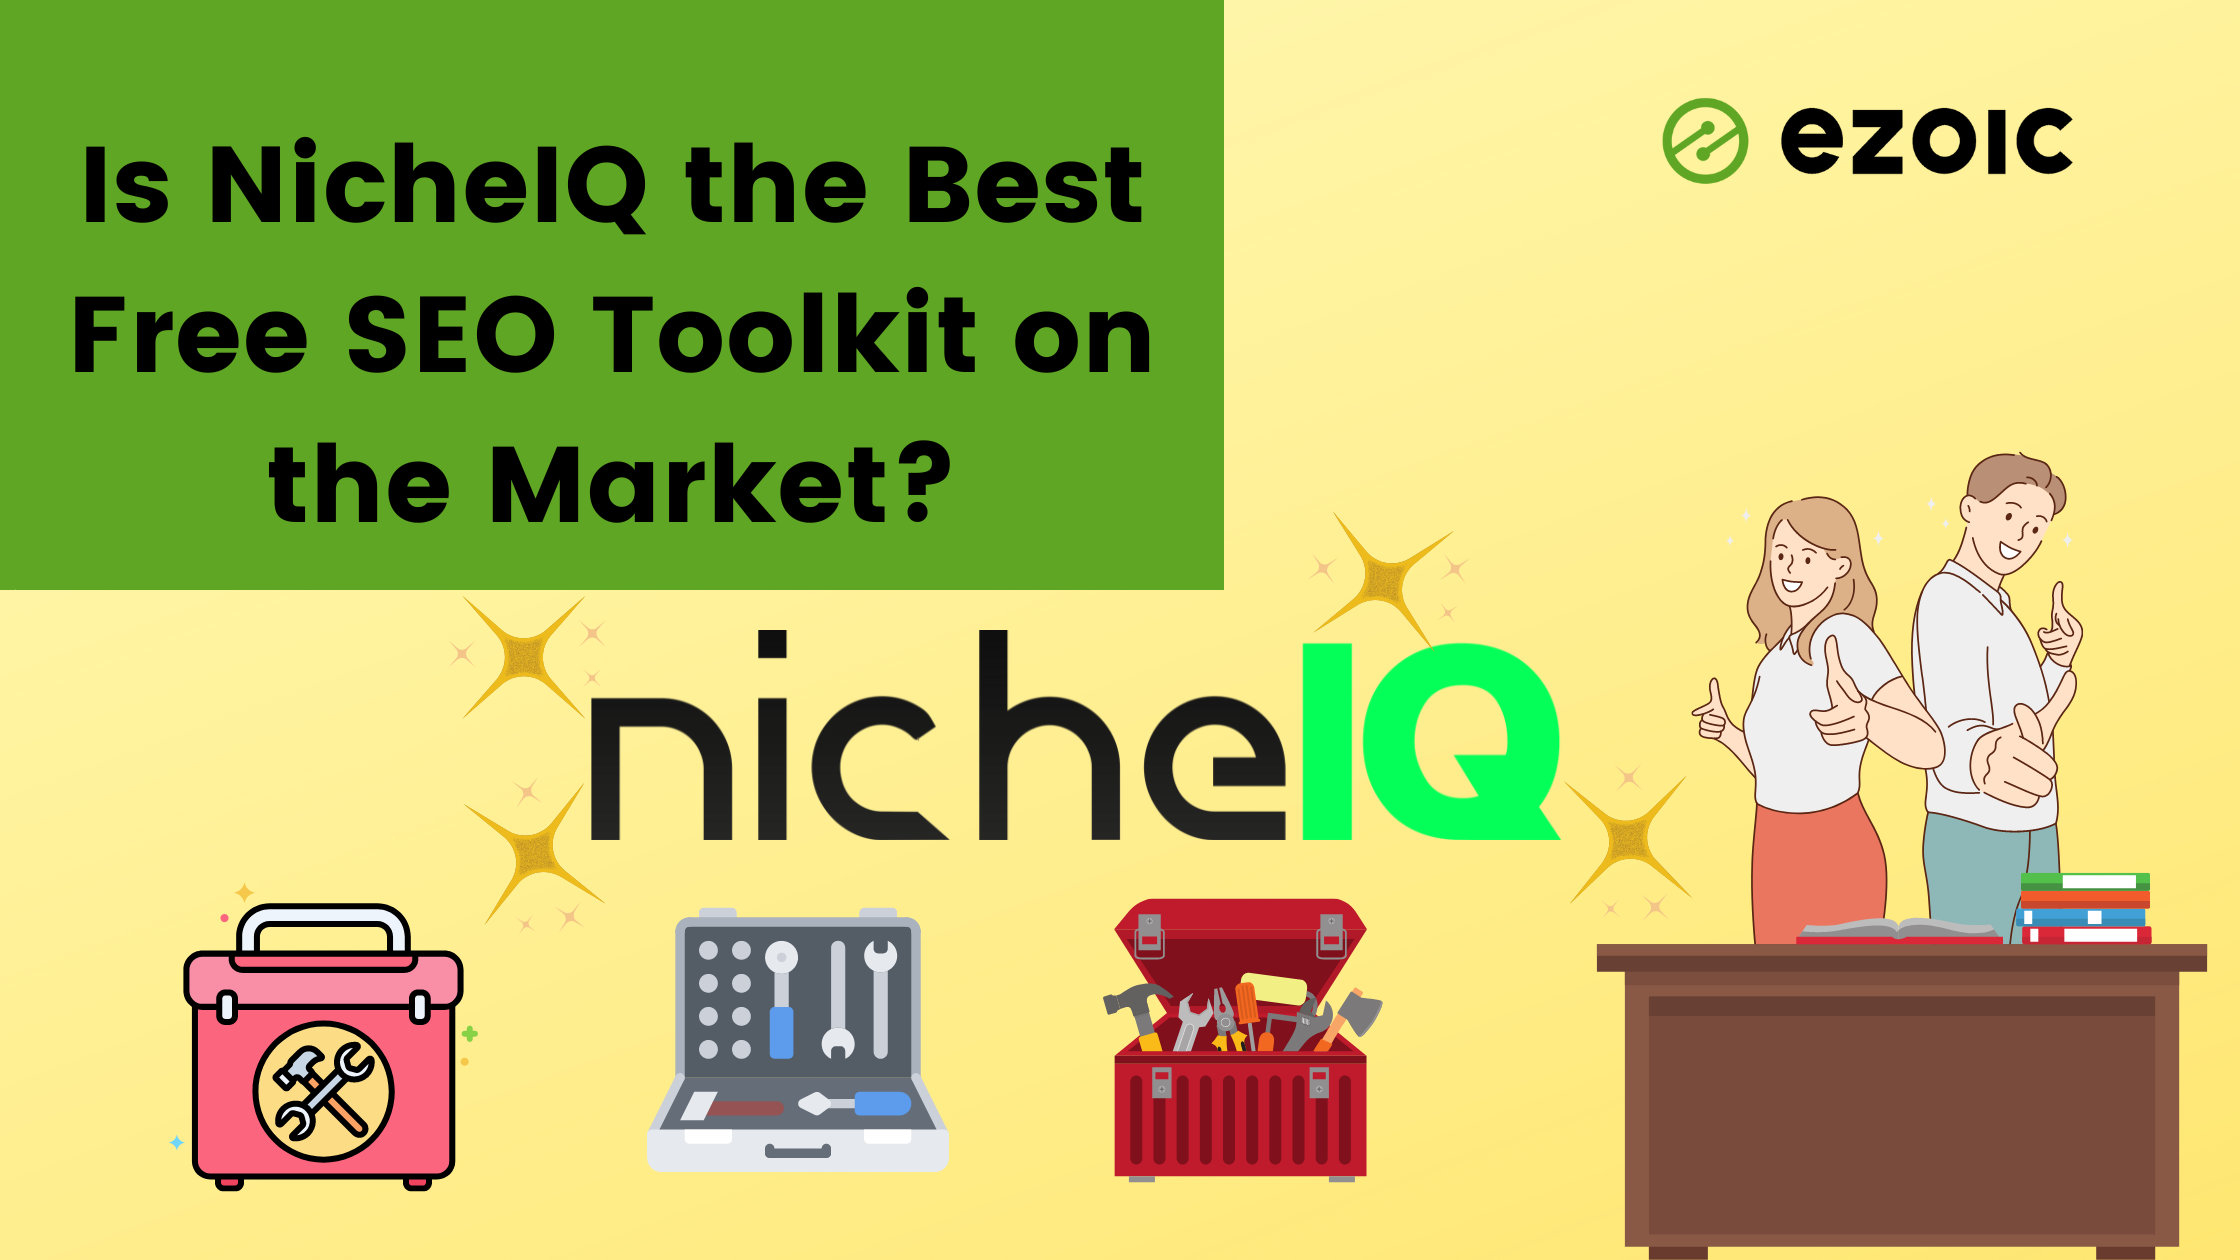 <strong>Is NicheIQ the Best Free SEO Toolkit on the Market?</strong>